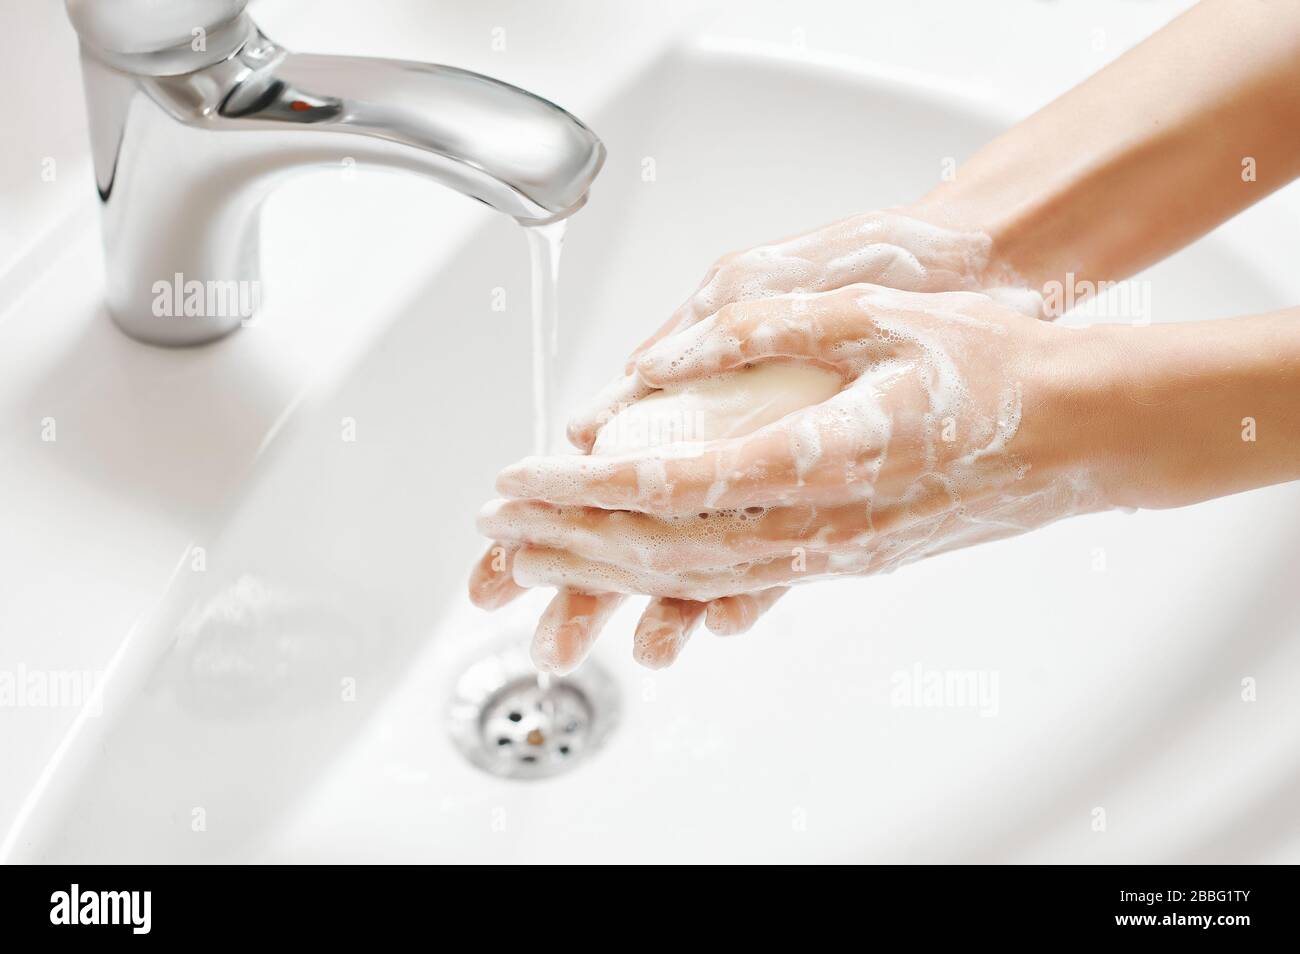 Hand Washing in white sink. Water flows from a faucet at soapy female hands. Covid-19 coronavirus protective measure. Stock Photo